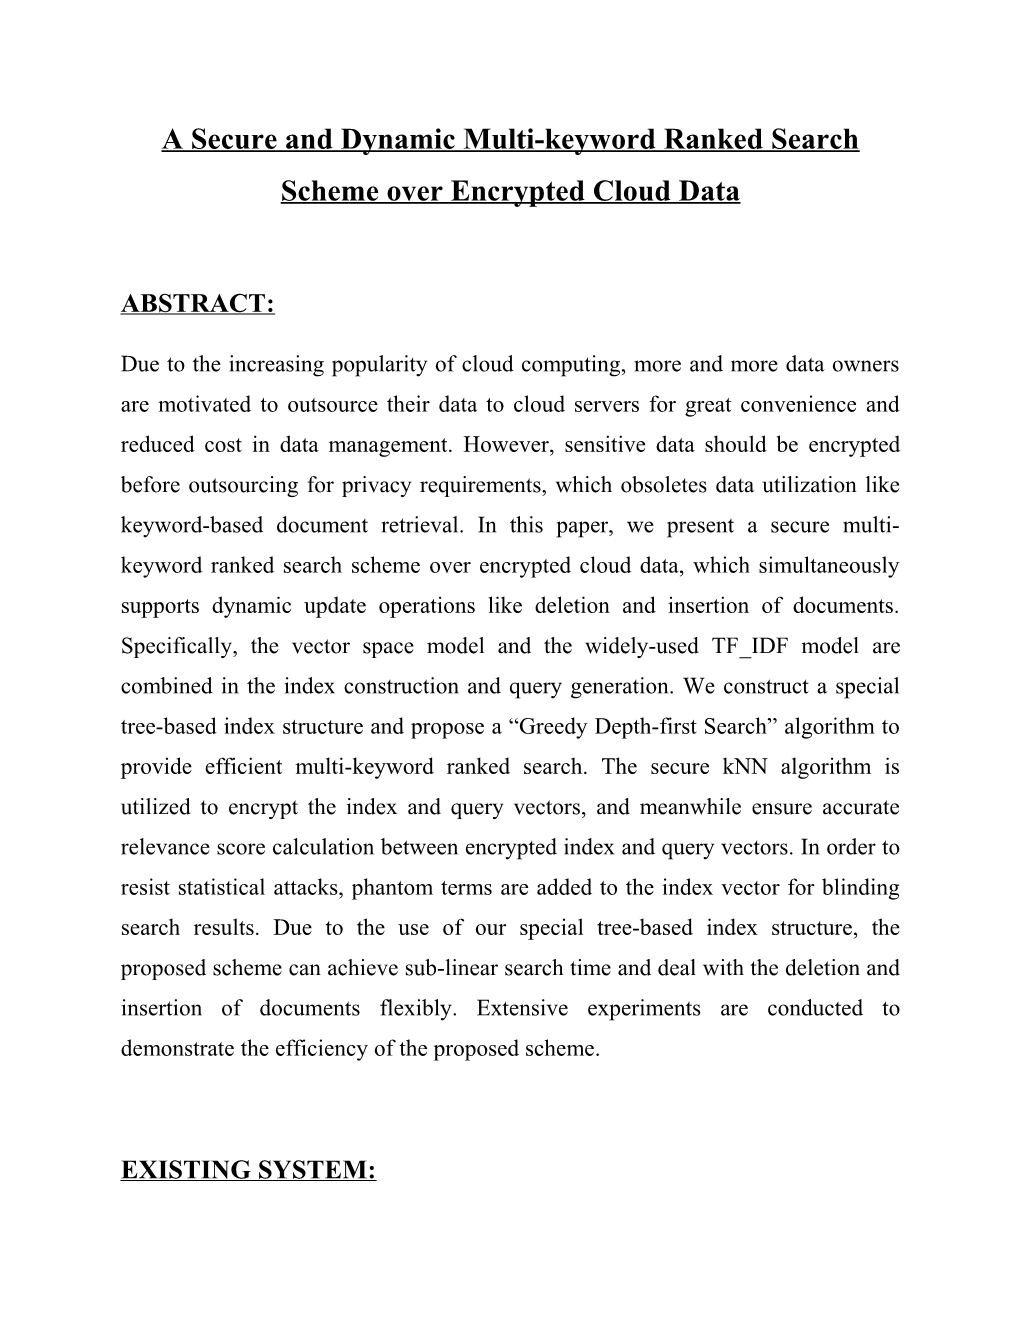 A Secure and Dynamic Multi-Keyword Rankedsearch Scheme Over Encrypted Cloud Data